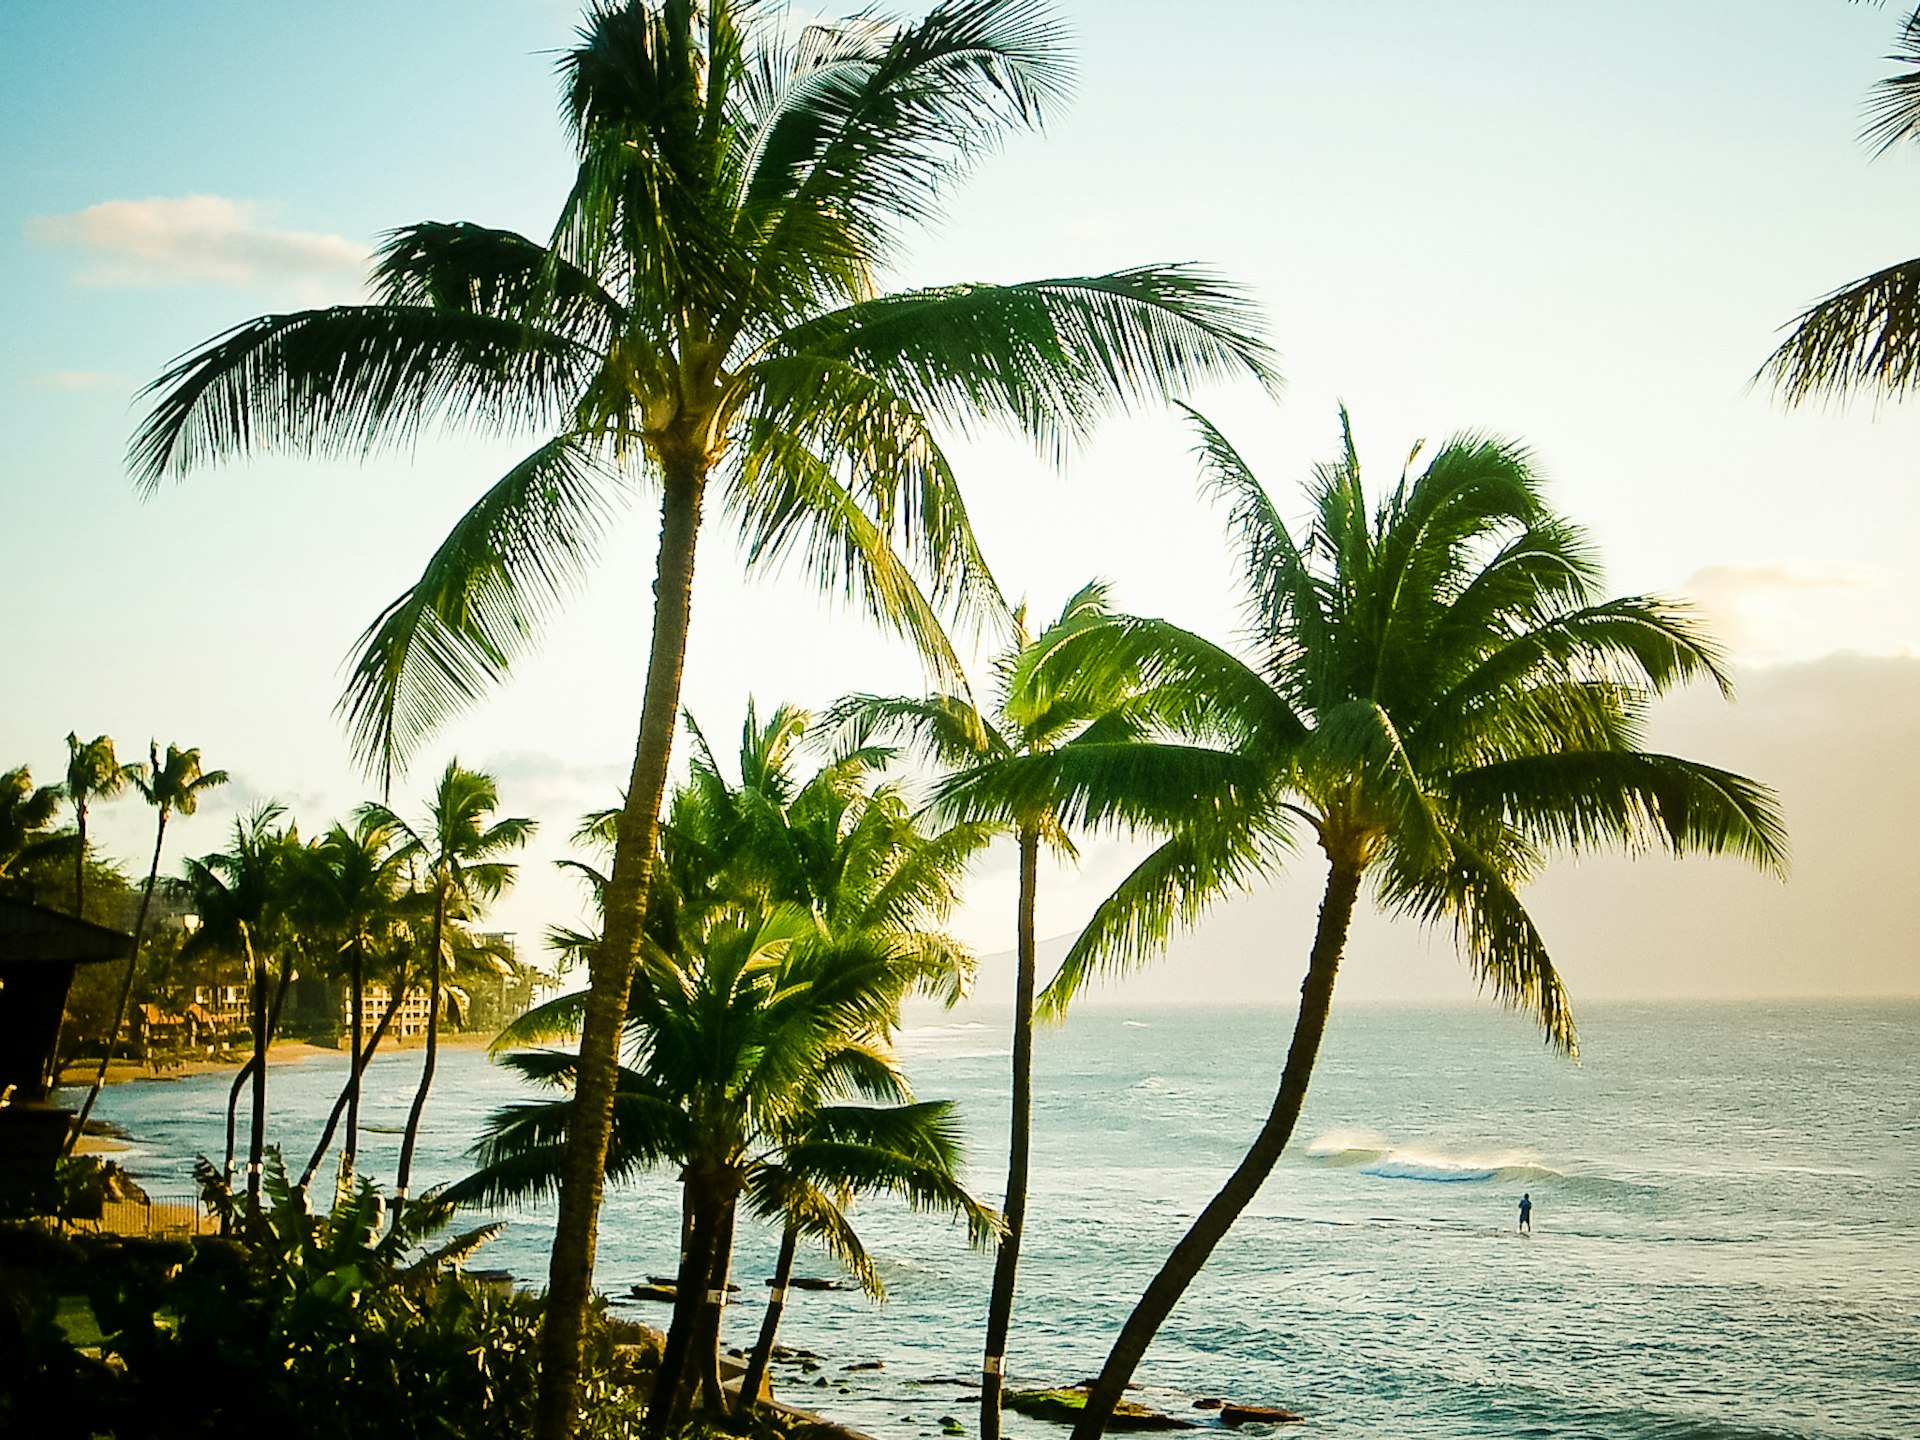 Palm trees line a beach. A solo surfer stands in the water looking out to sea